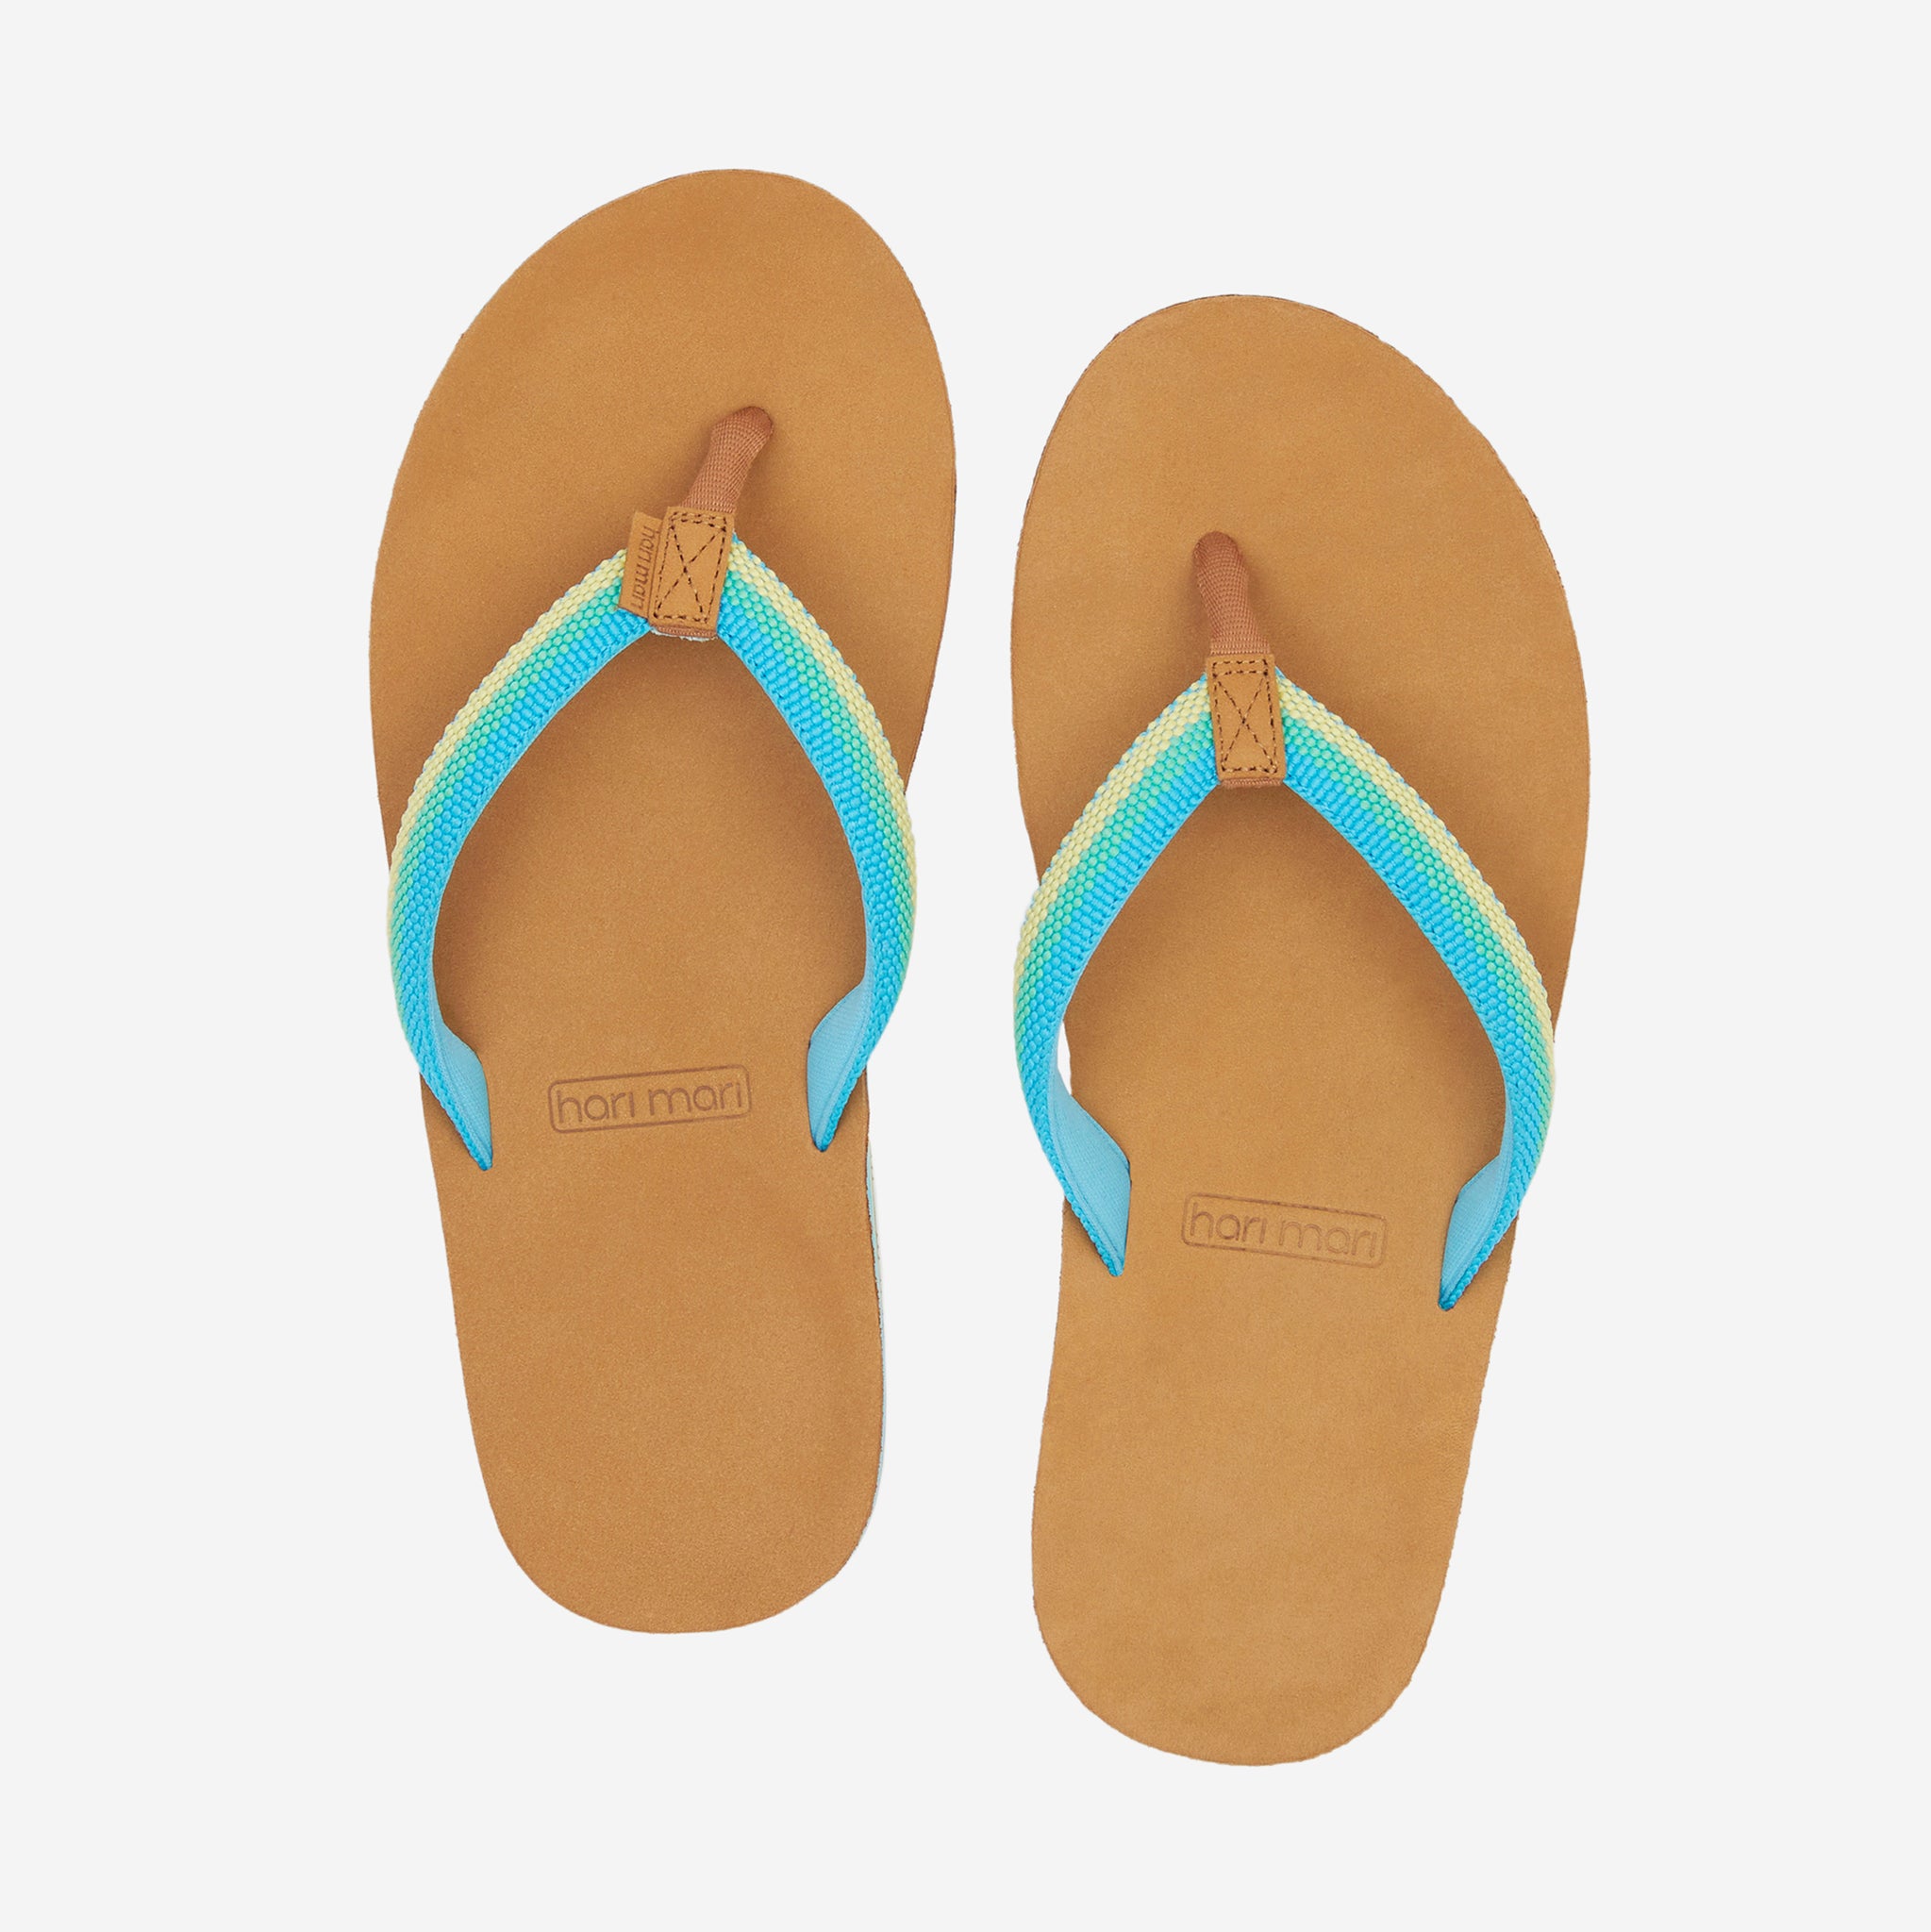 leather flip flop sandals from Hari Mari with blue green and yellow stripe on strap